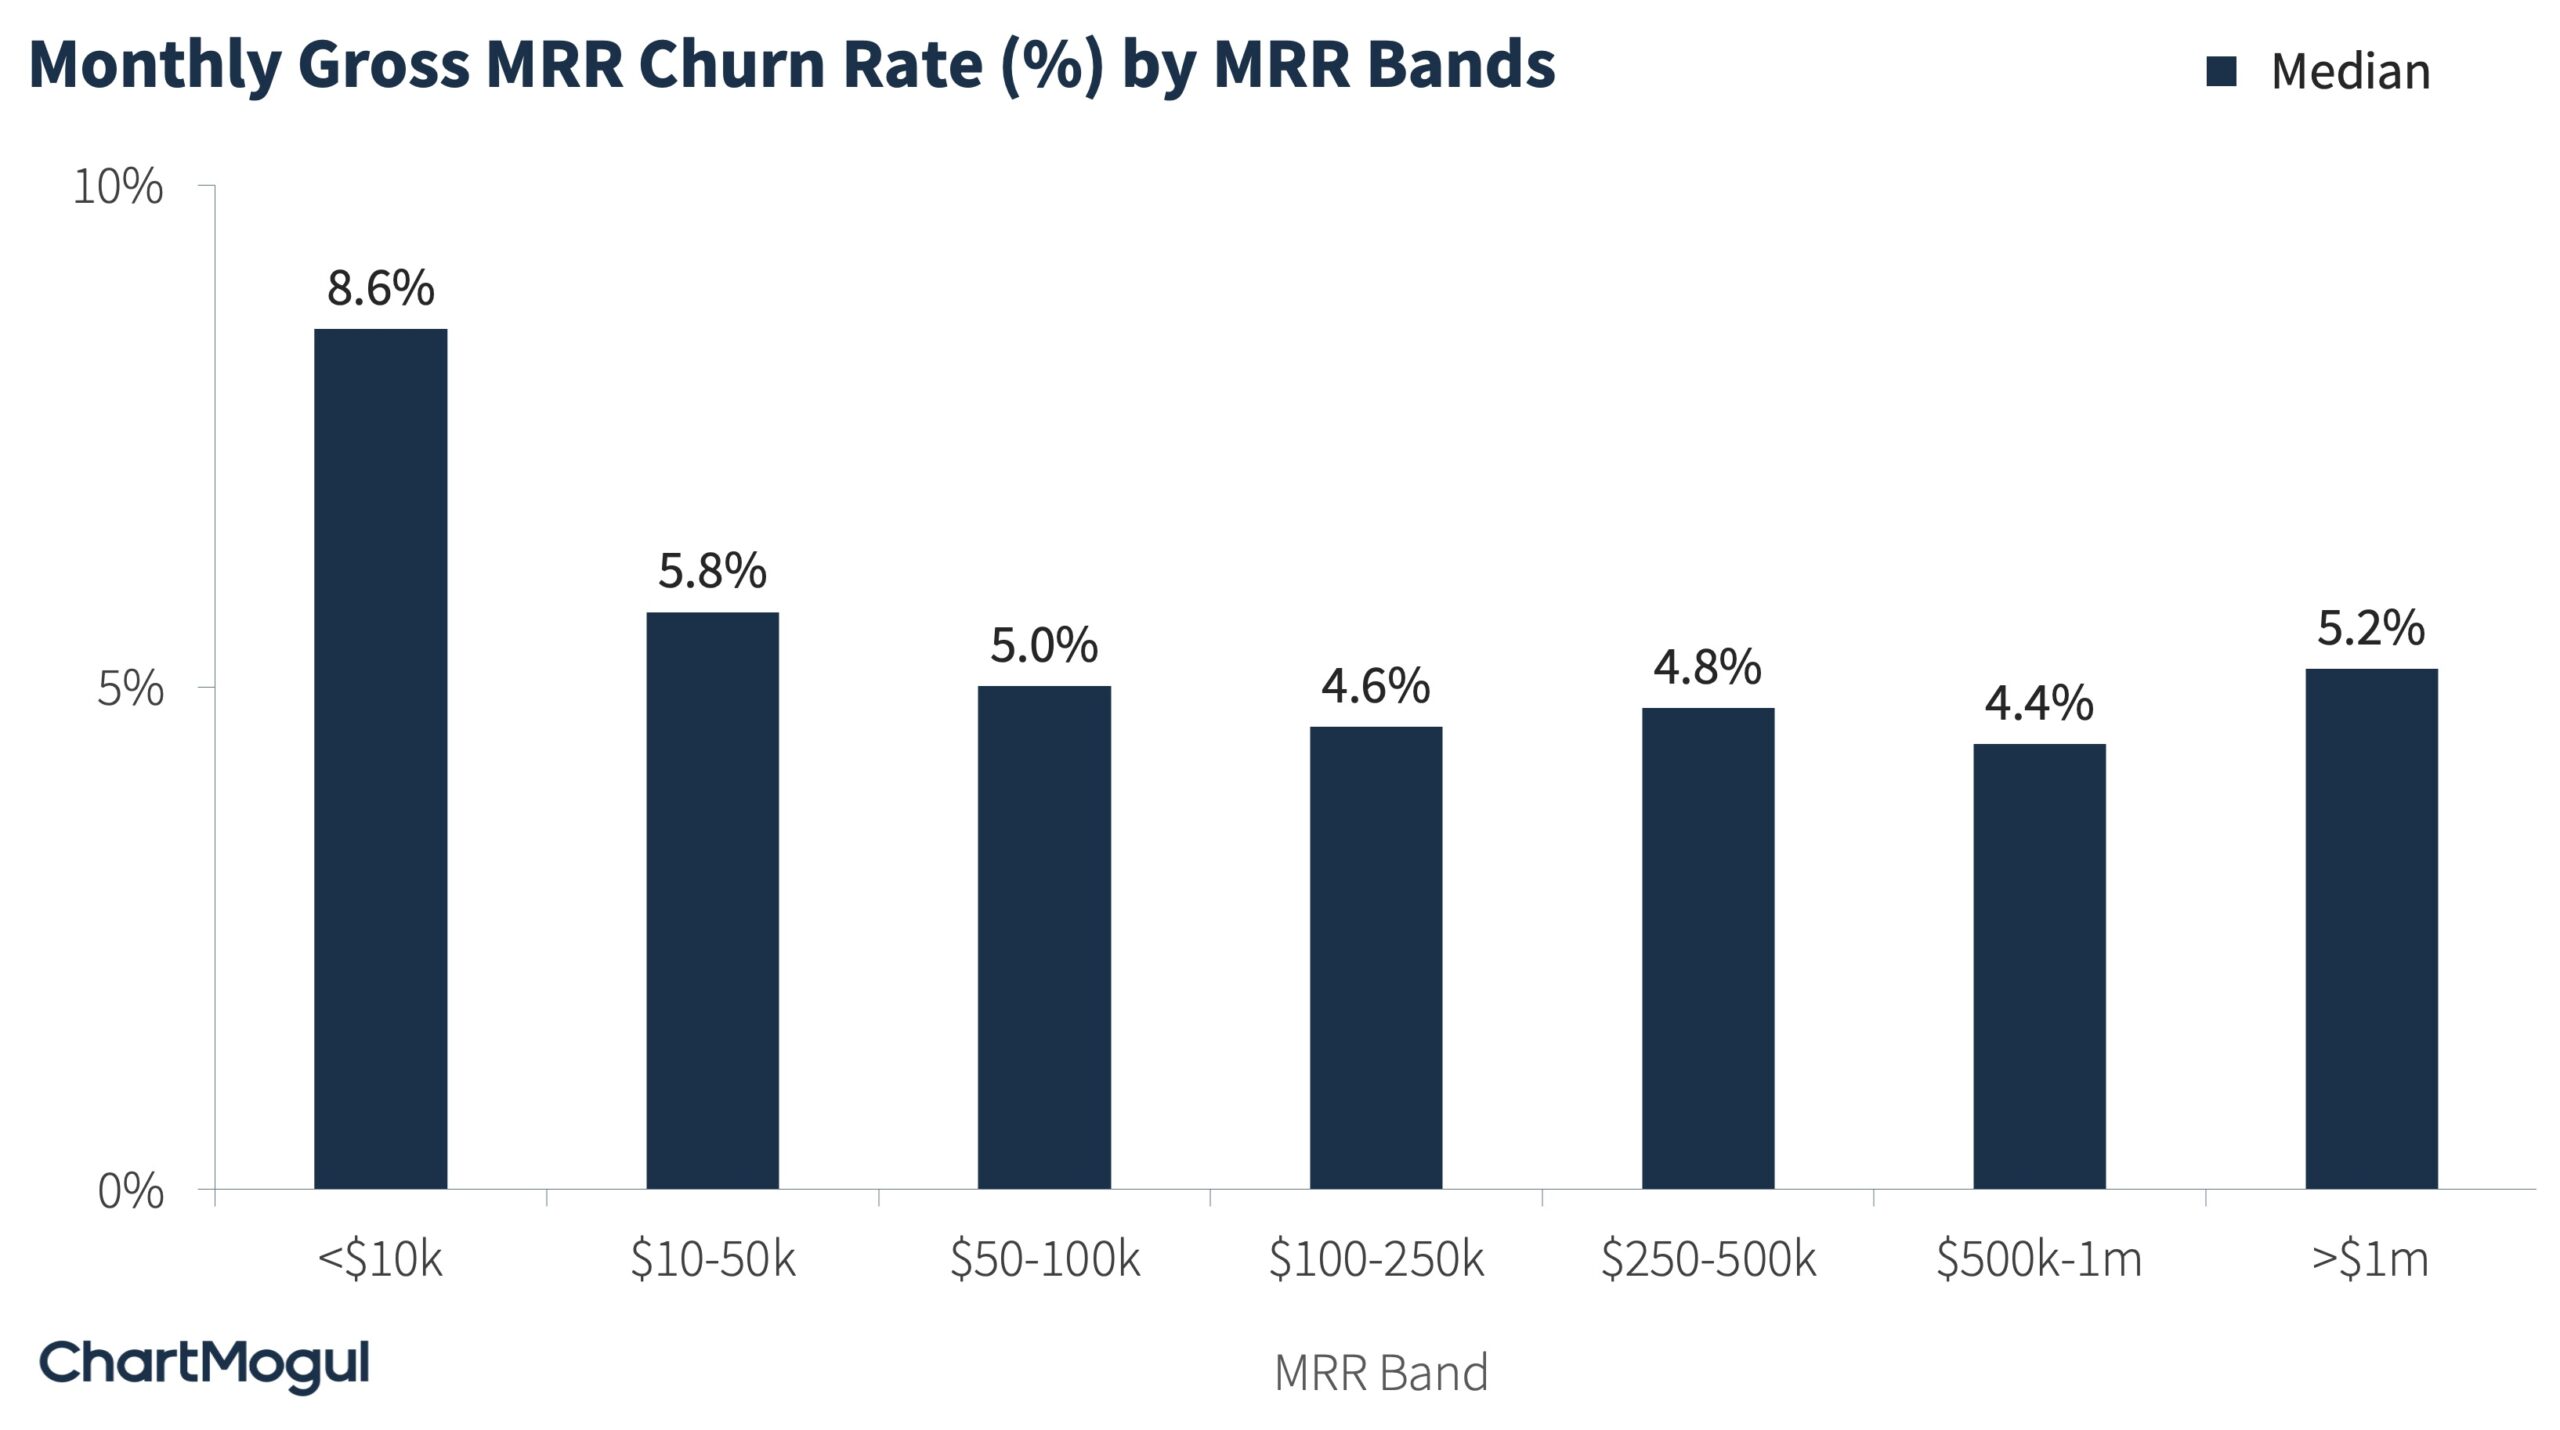 Monthly Gross MRR Churn rate by MRR Bands